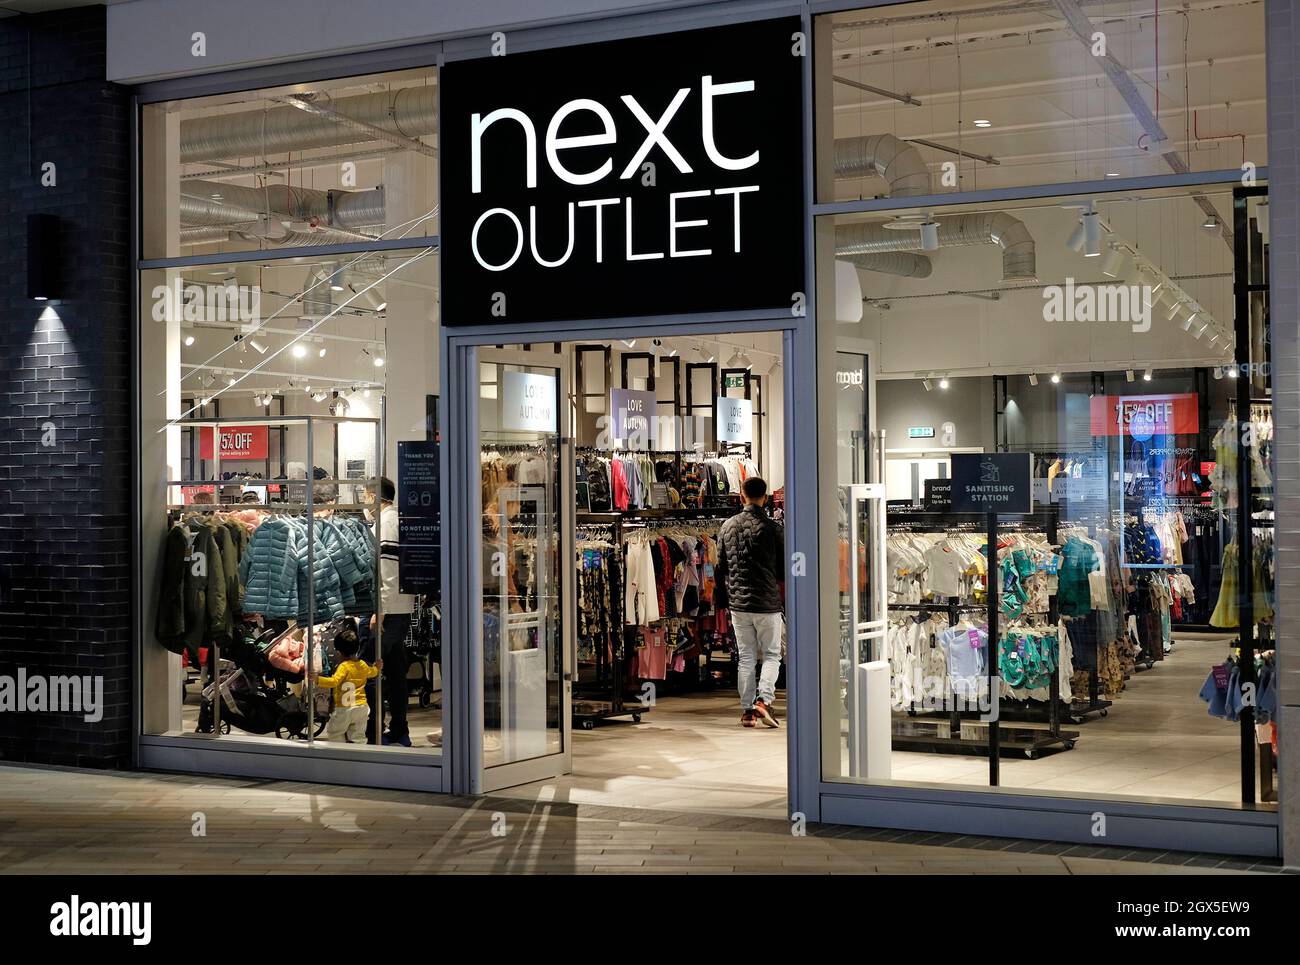 next outlet store, O2 arena shopping mall, london, england Stock Photo